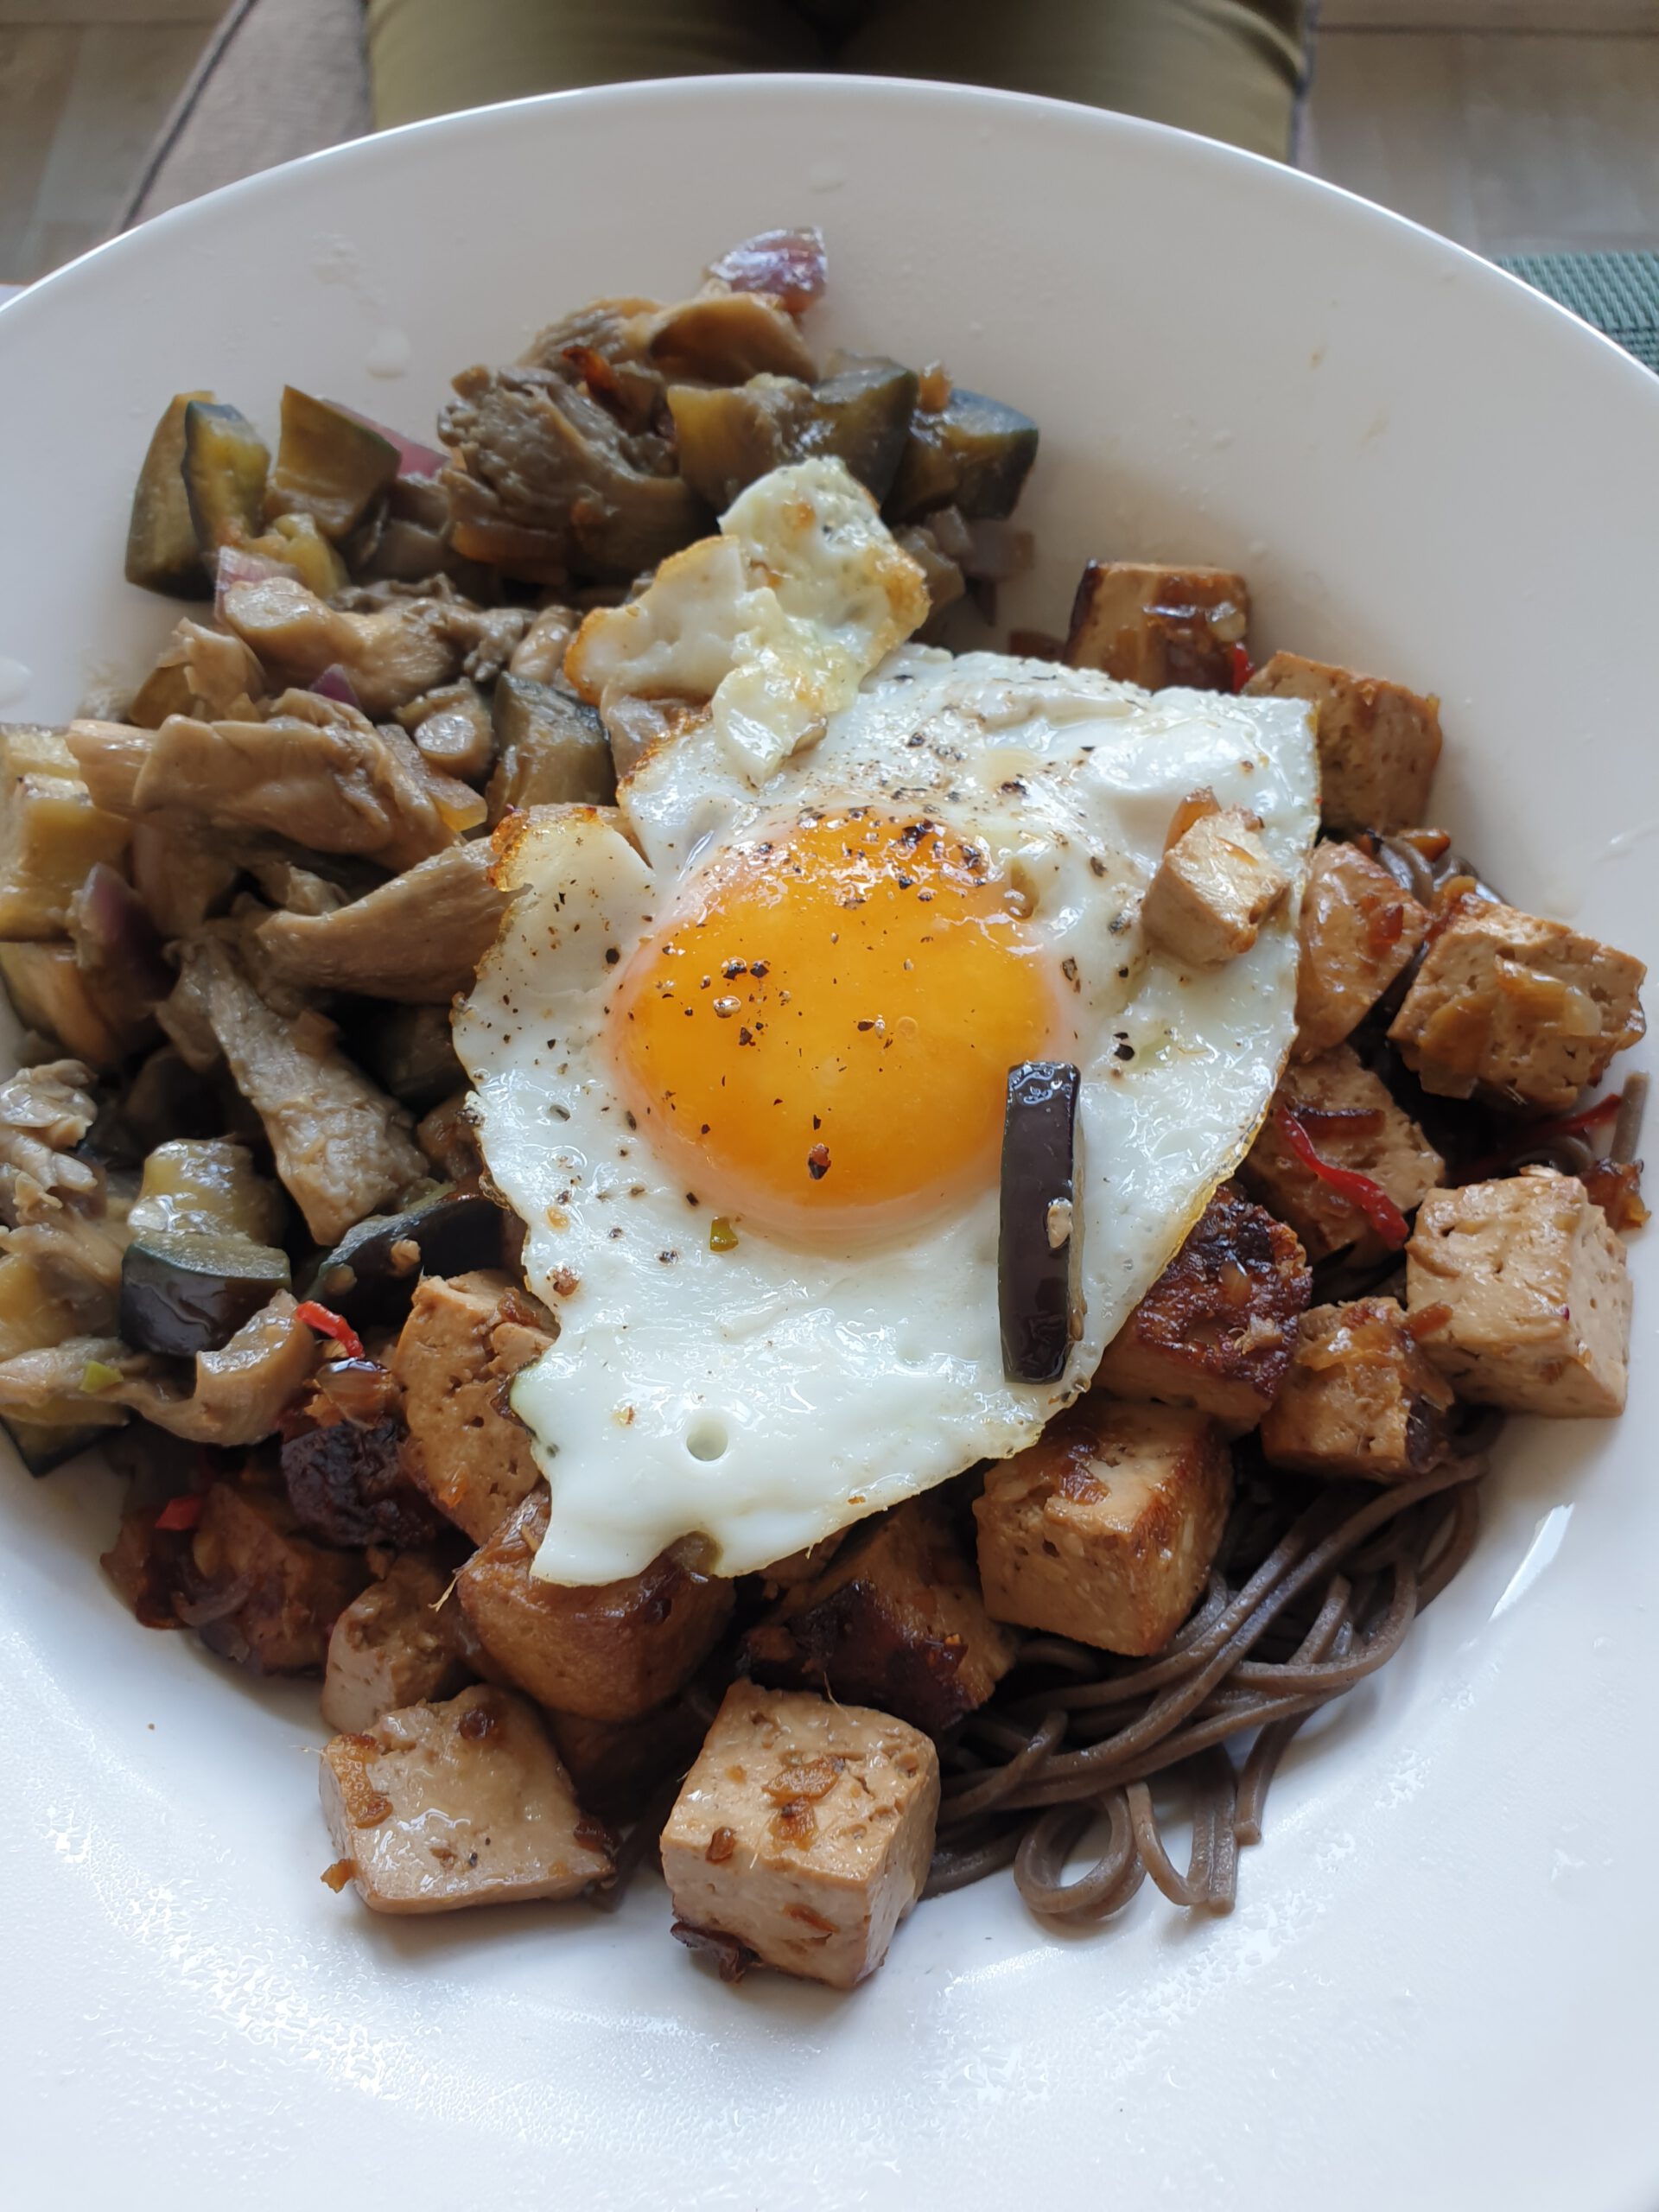 Azian wok dish with fried egg